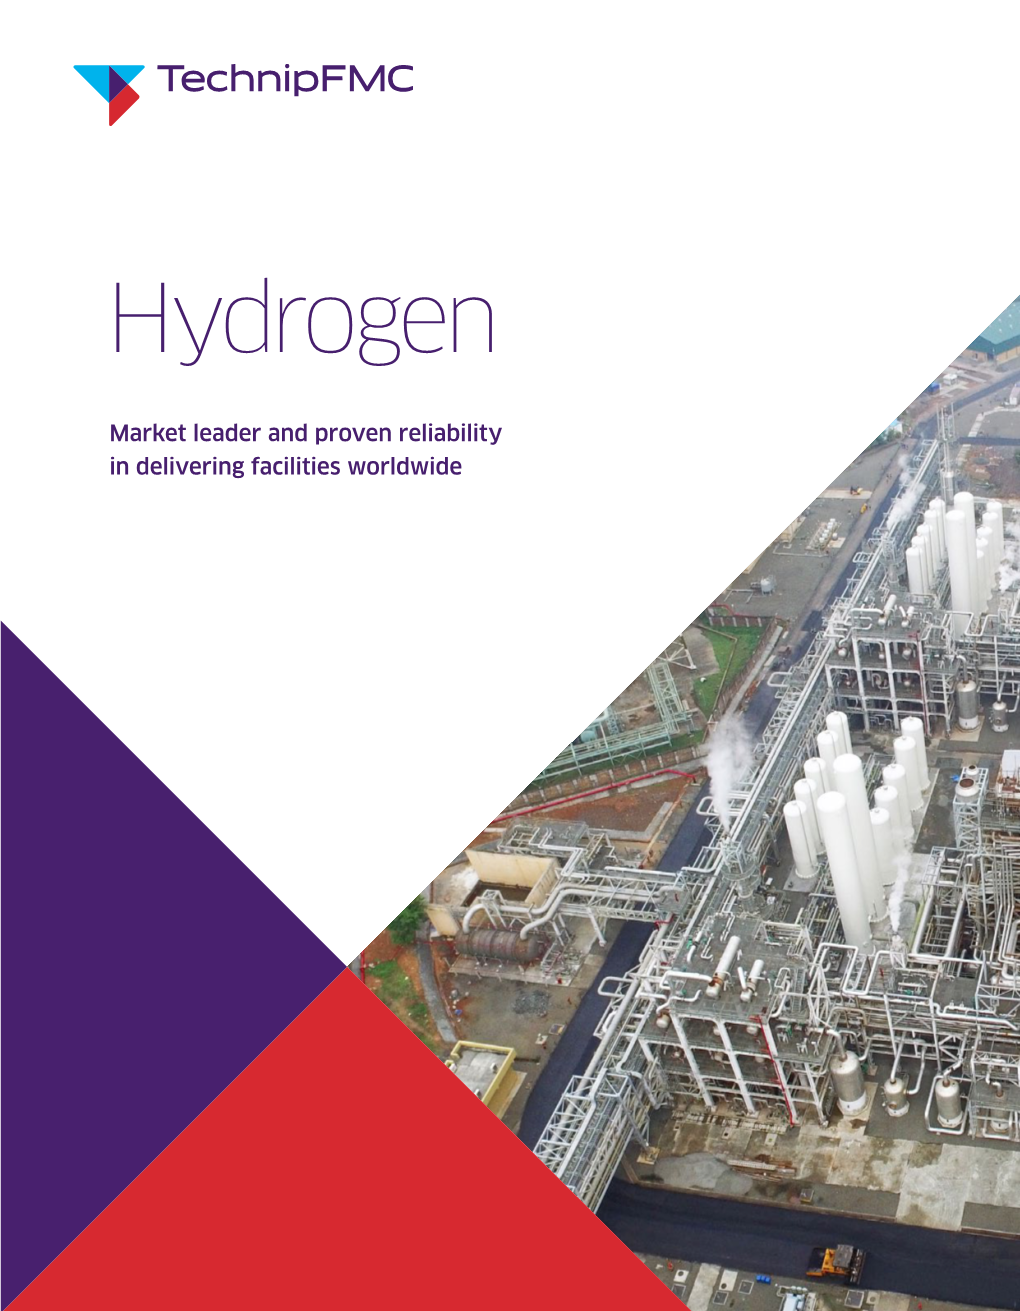 The Hydrogen Industry's Global Leader